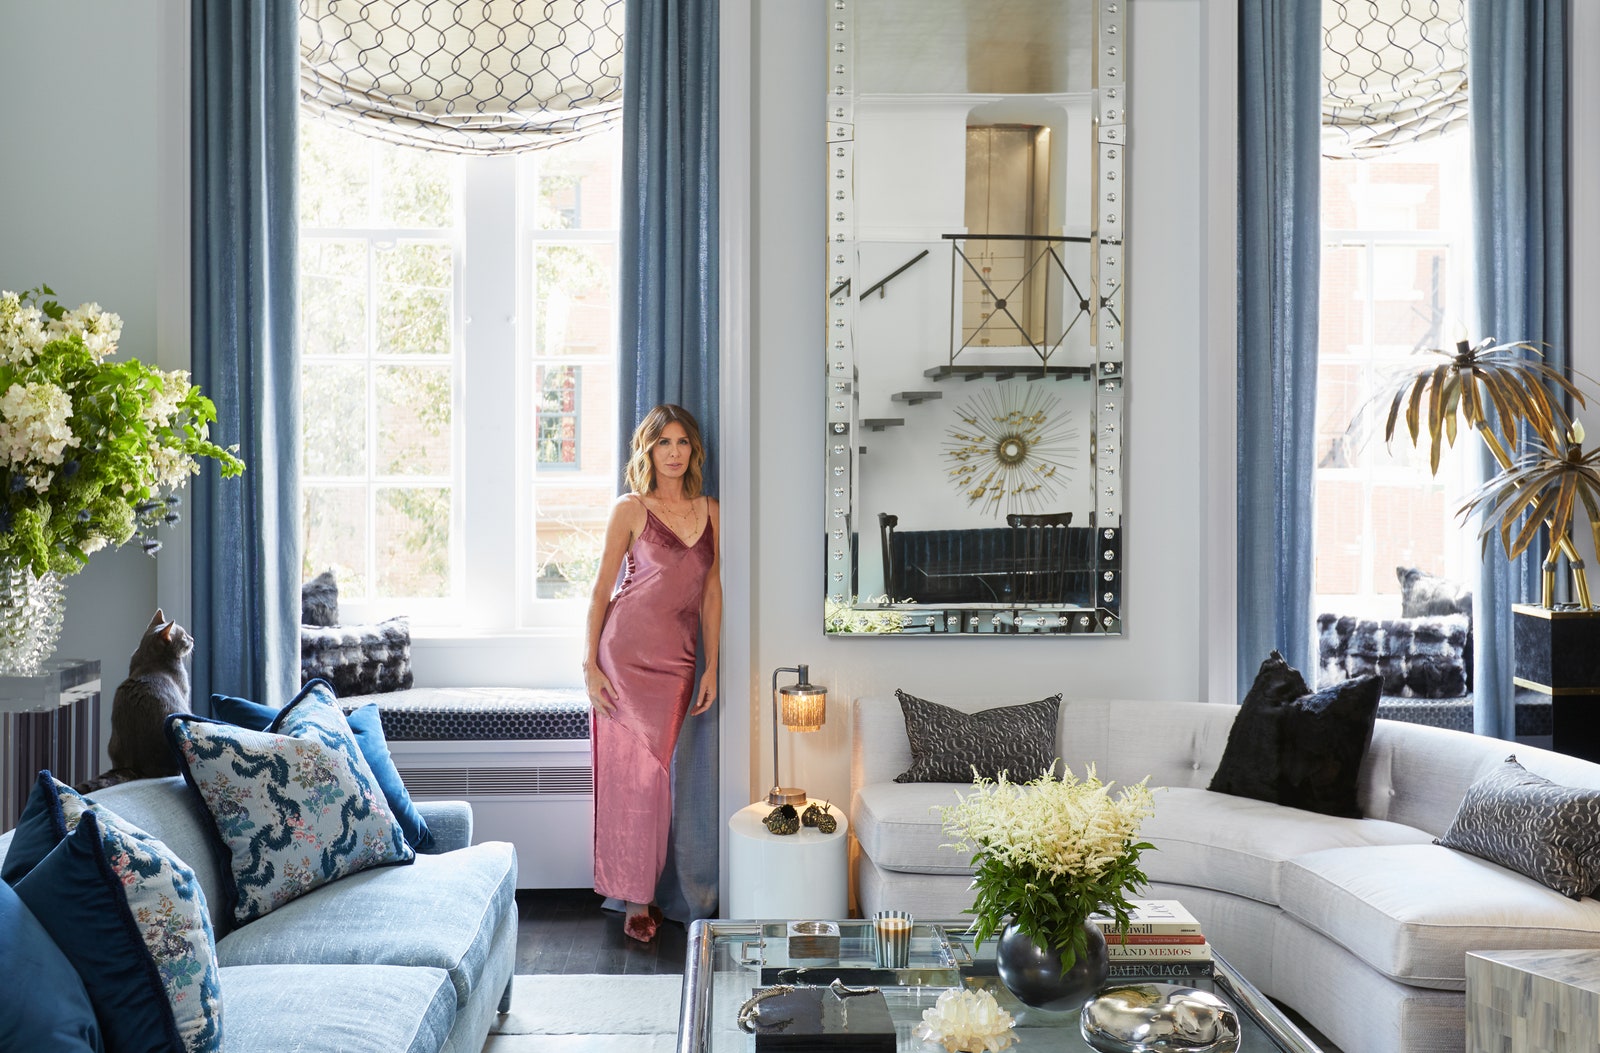 “Real Housewives of New York” alum Carole Radziwill in pink dress standing in living area with bay window blue curtains...